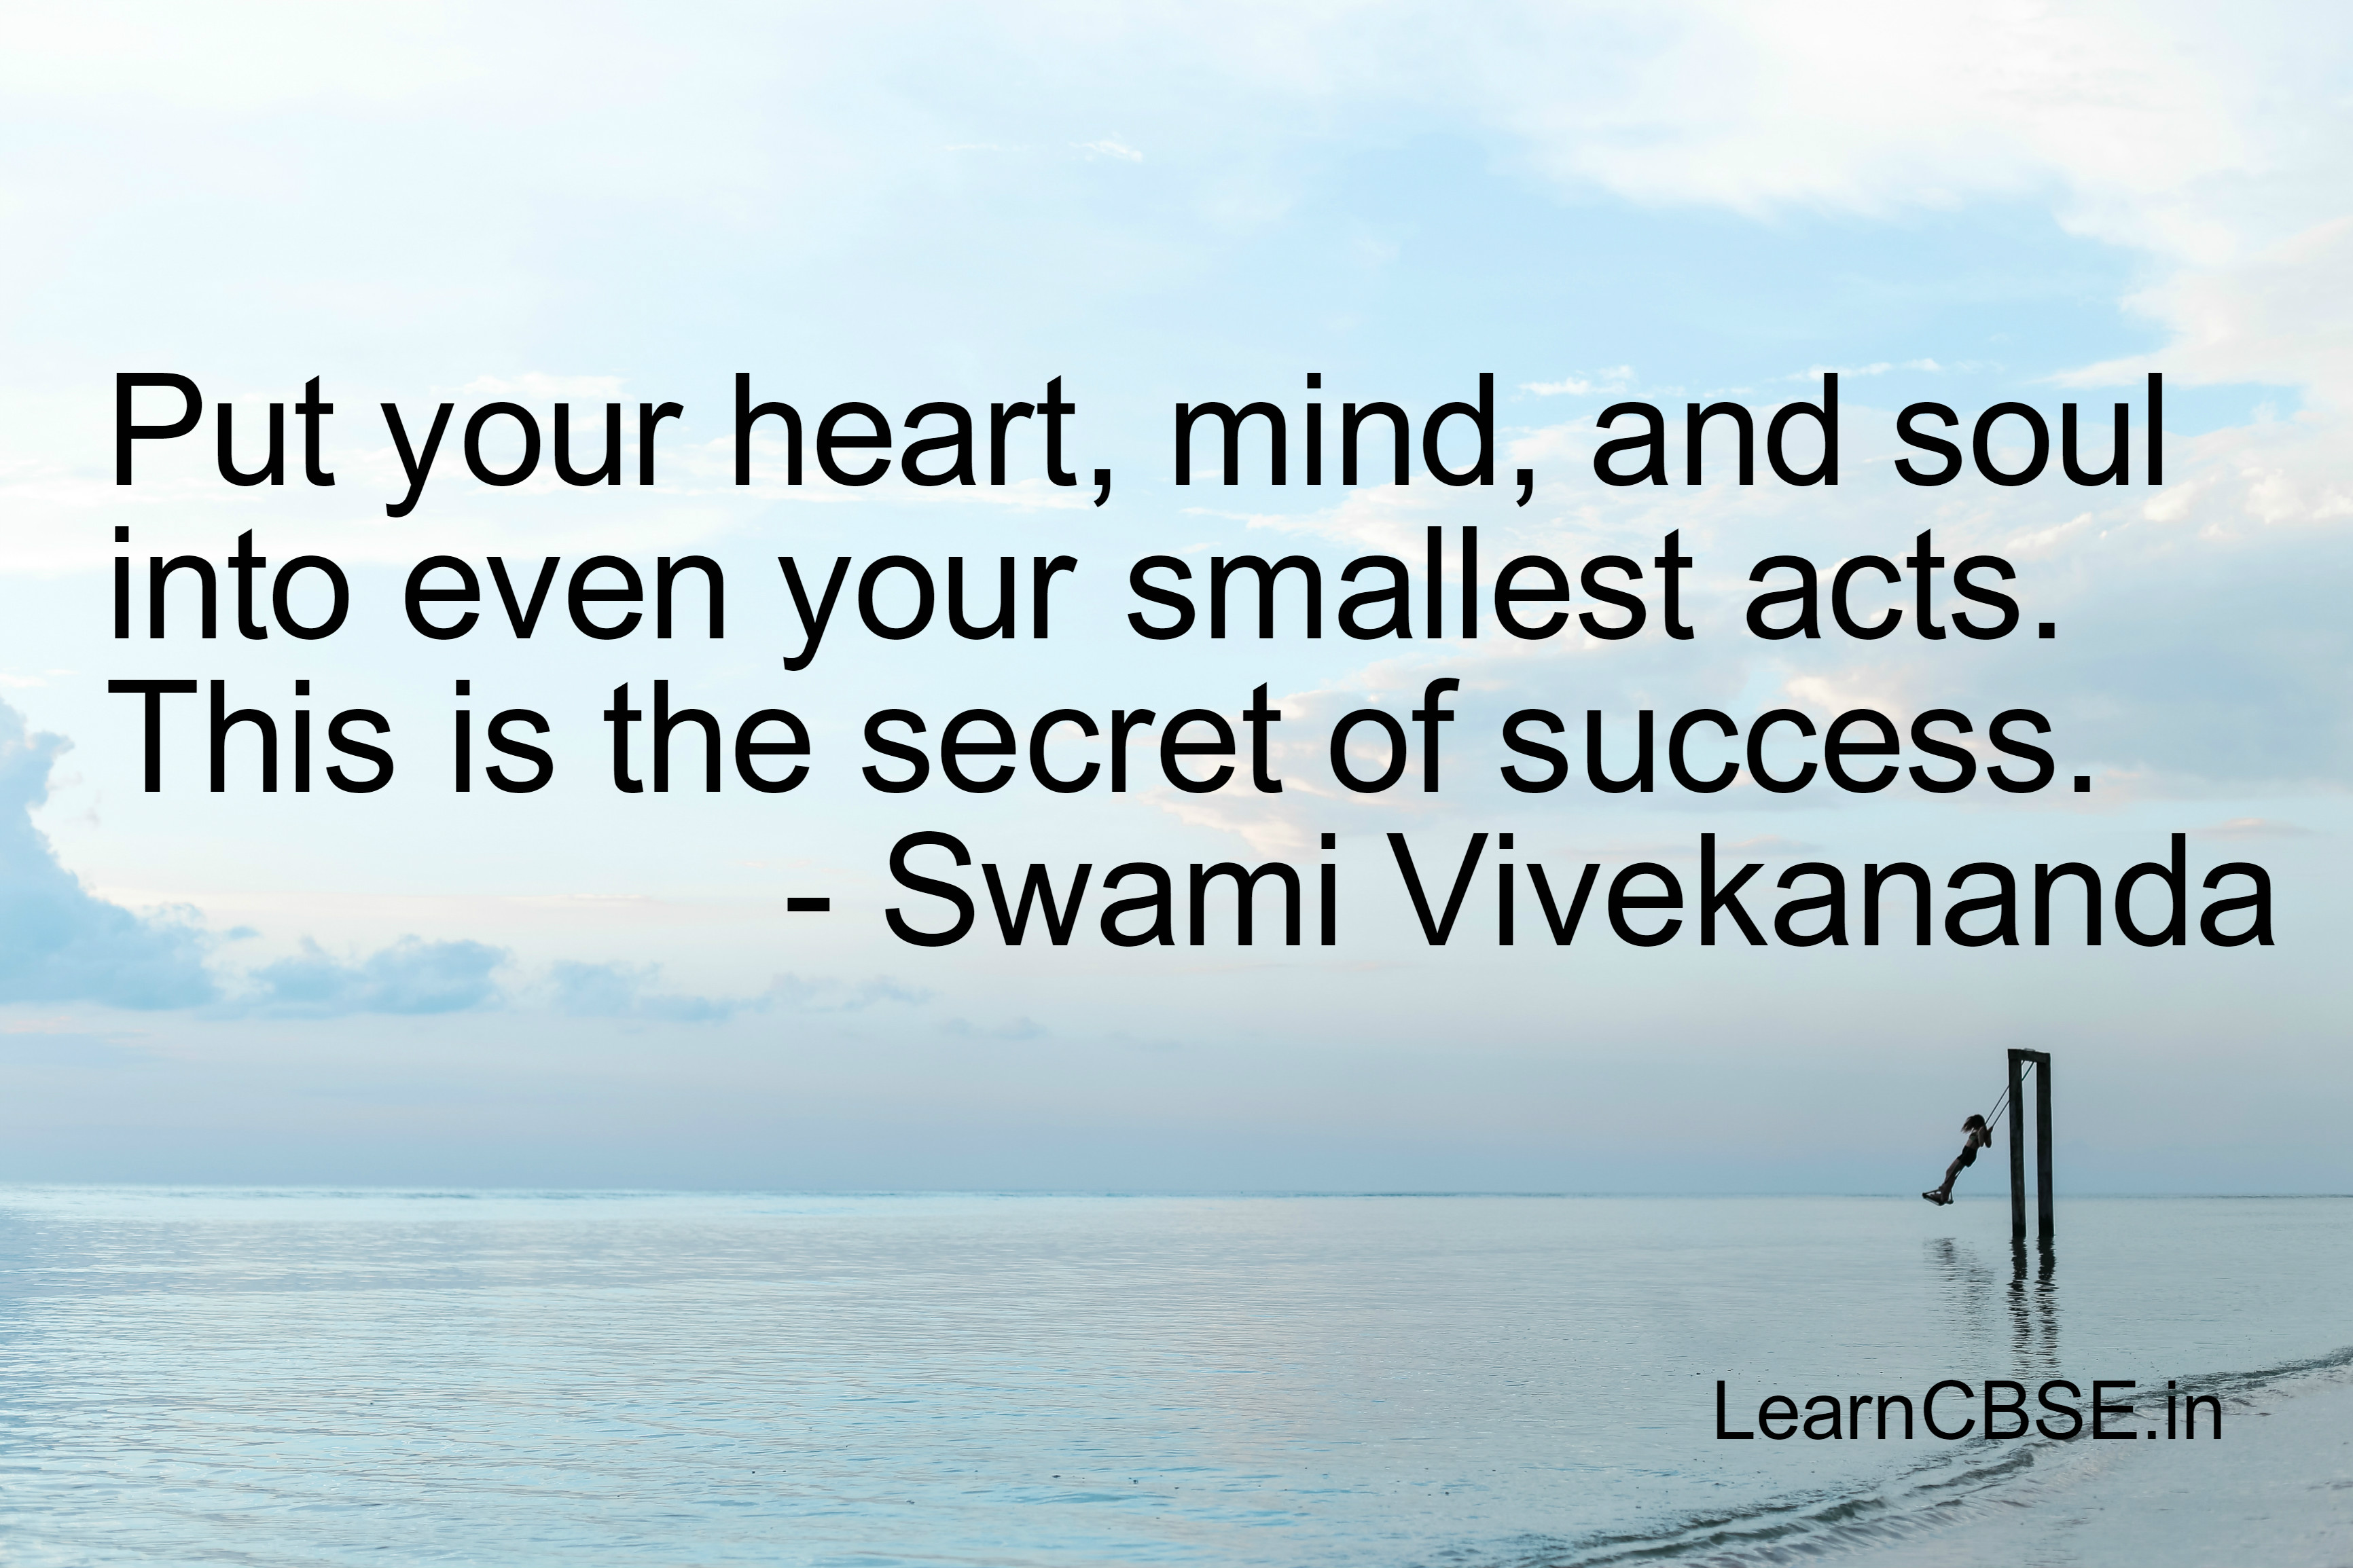 Put your heart, mind, and soul into even your smallest acts.